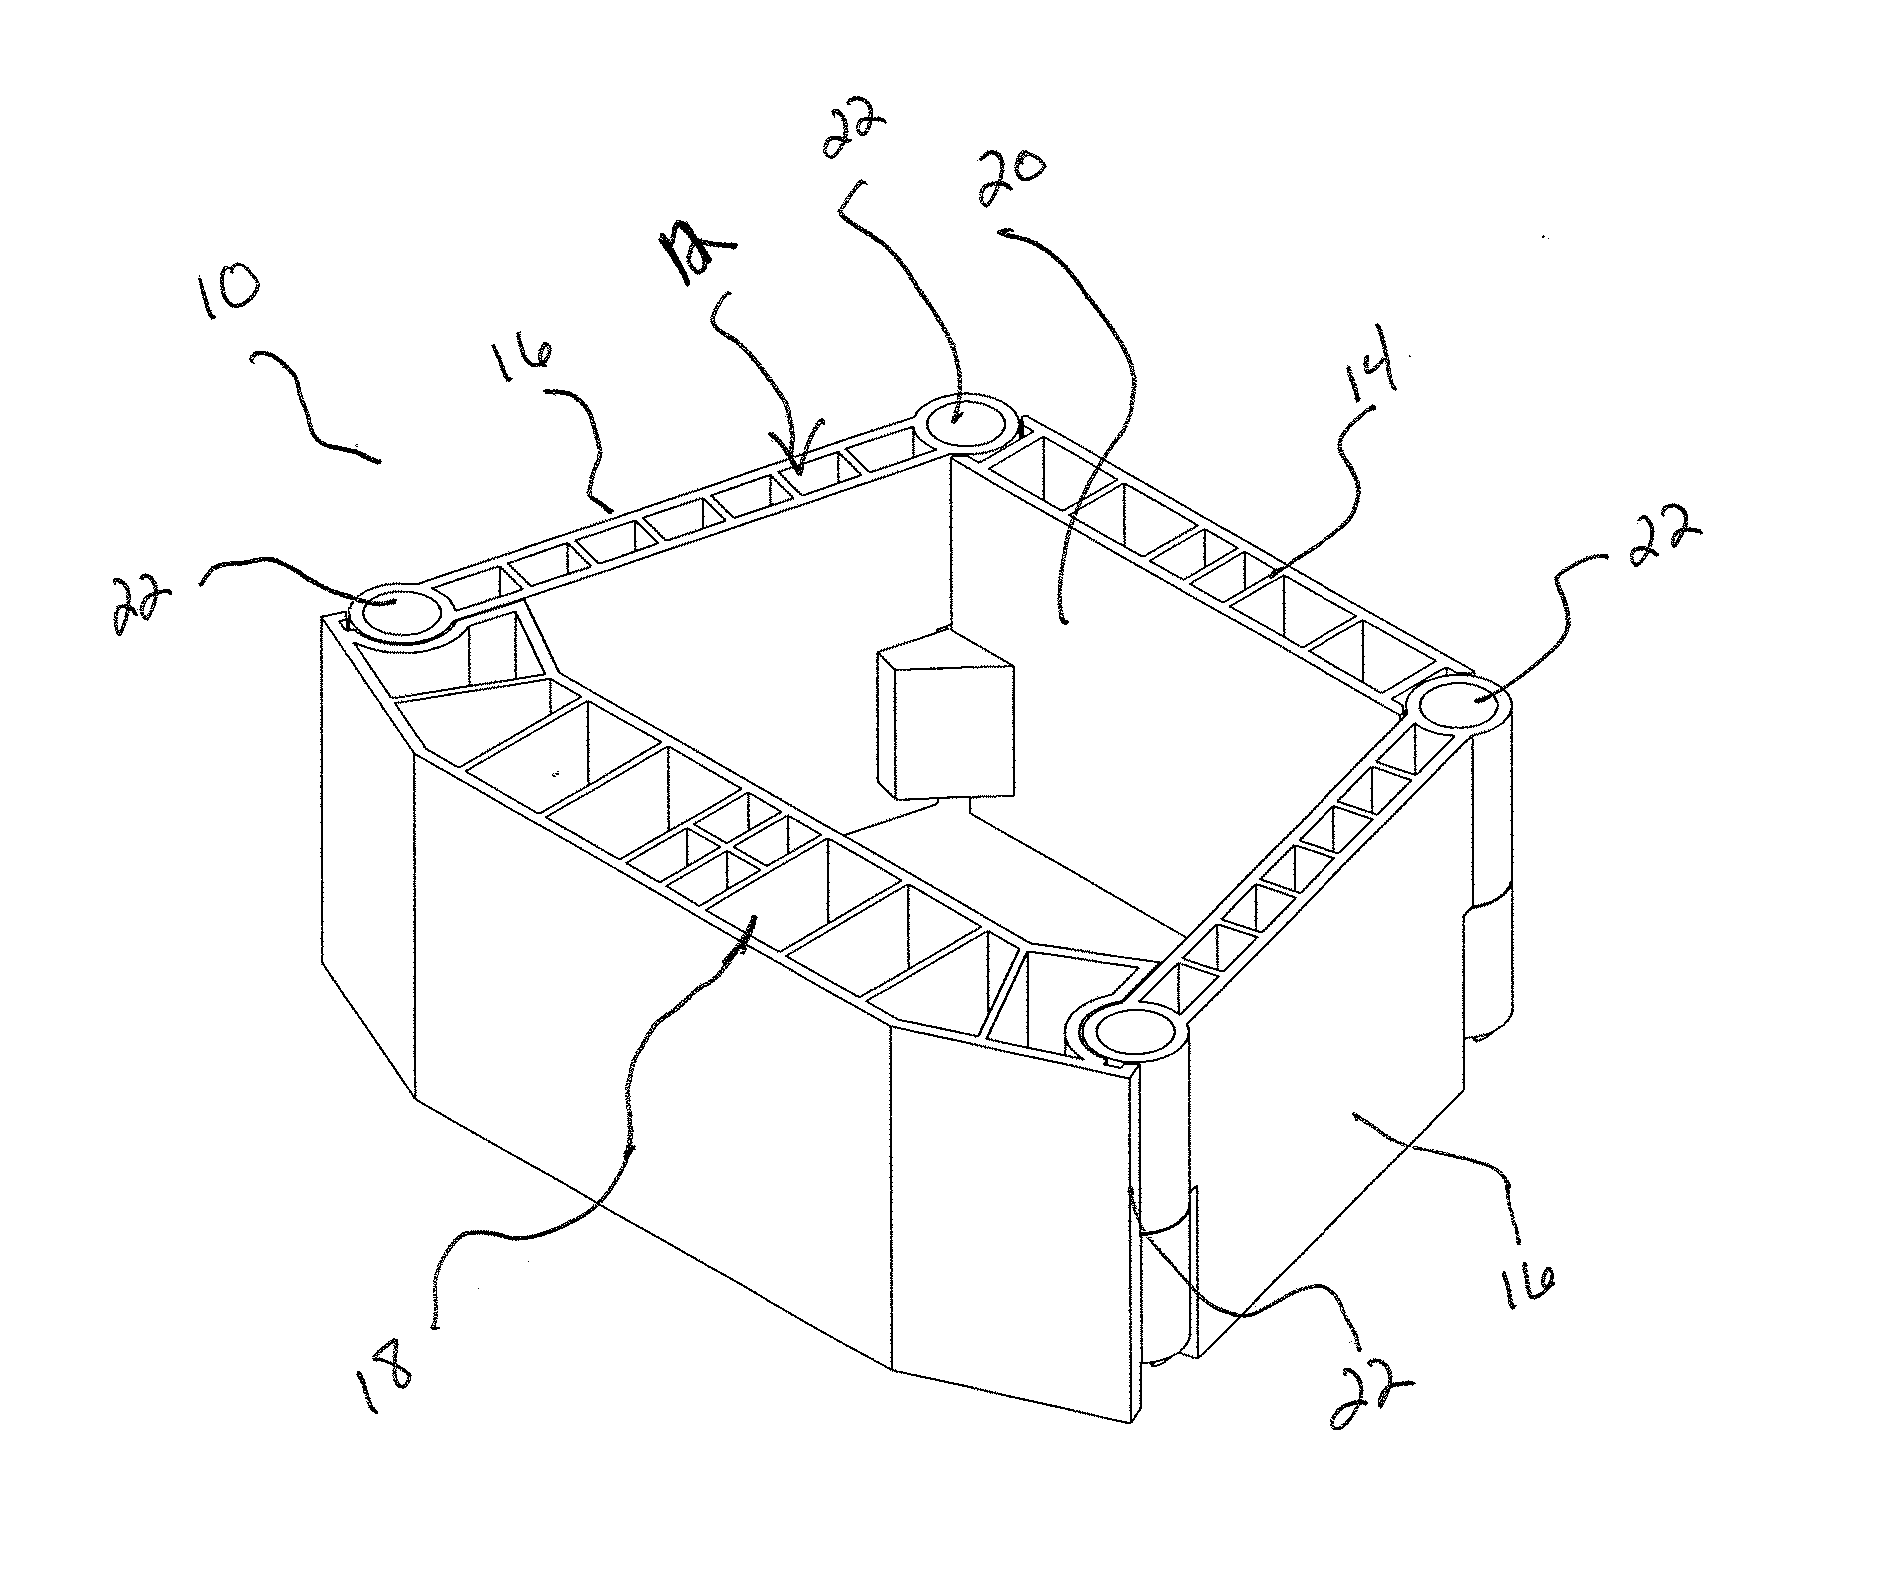 Continuous chamber mass confinement cells and methods of use thereof